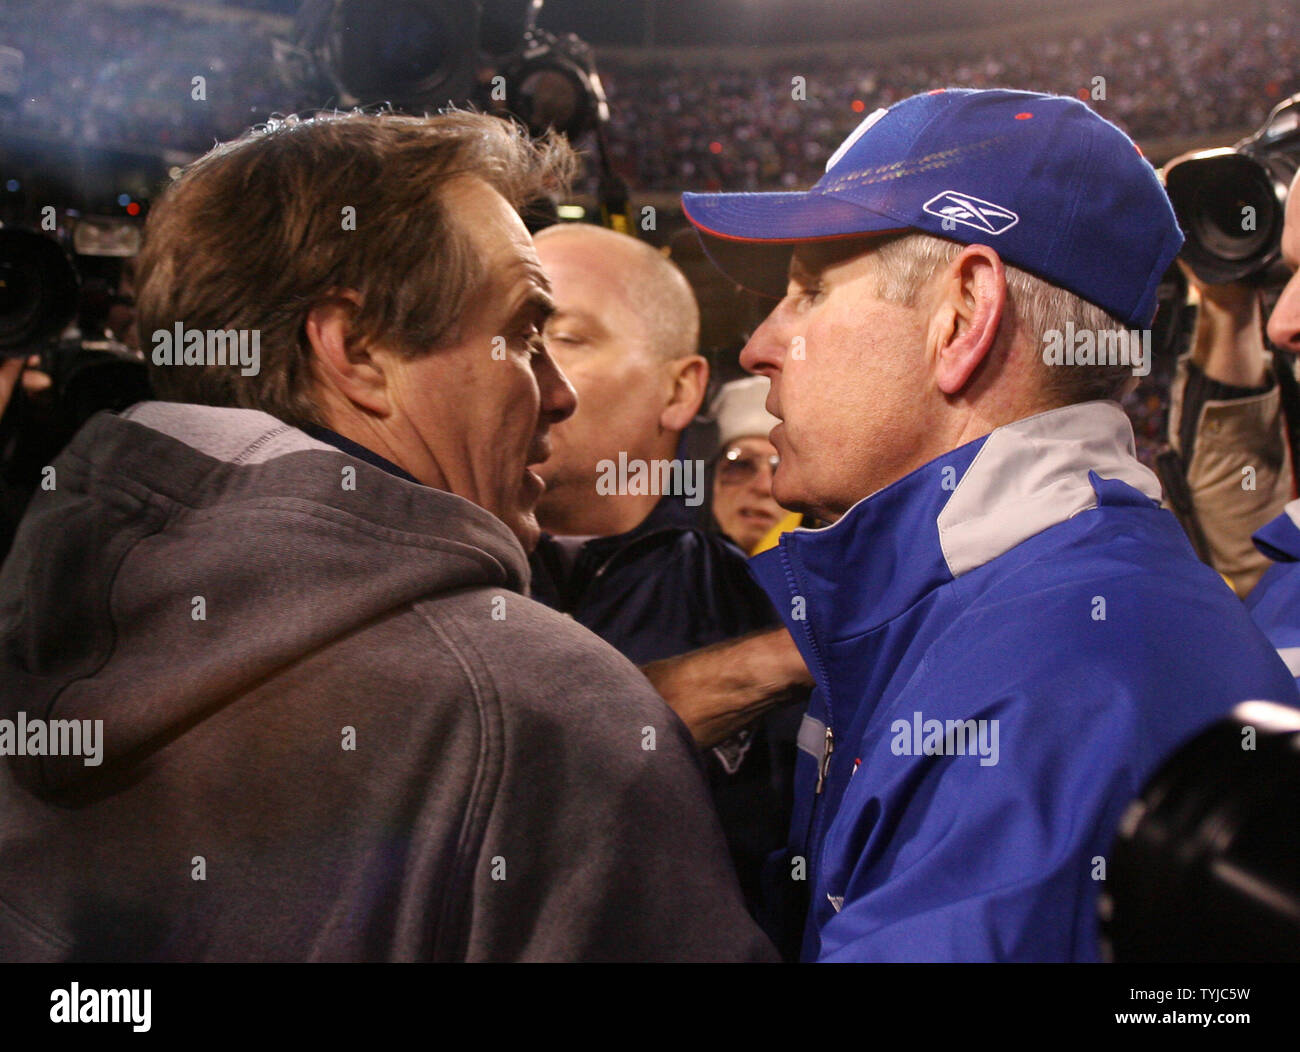 New York Giants head coach Tom Coughlin and New England Patriots head coach Bill Belichick (L) exchange words after the game at Giants Stadium in East Rutherford, New Jersey on December 29, 2007. The Patriots defeated the Giants 38-35 and finished the regular season at 16-0.   (UPI Photo/John Angelillo)      . Stock Photo